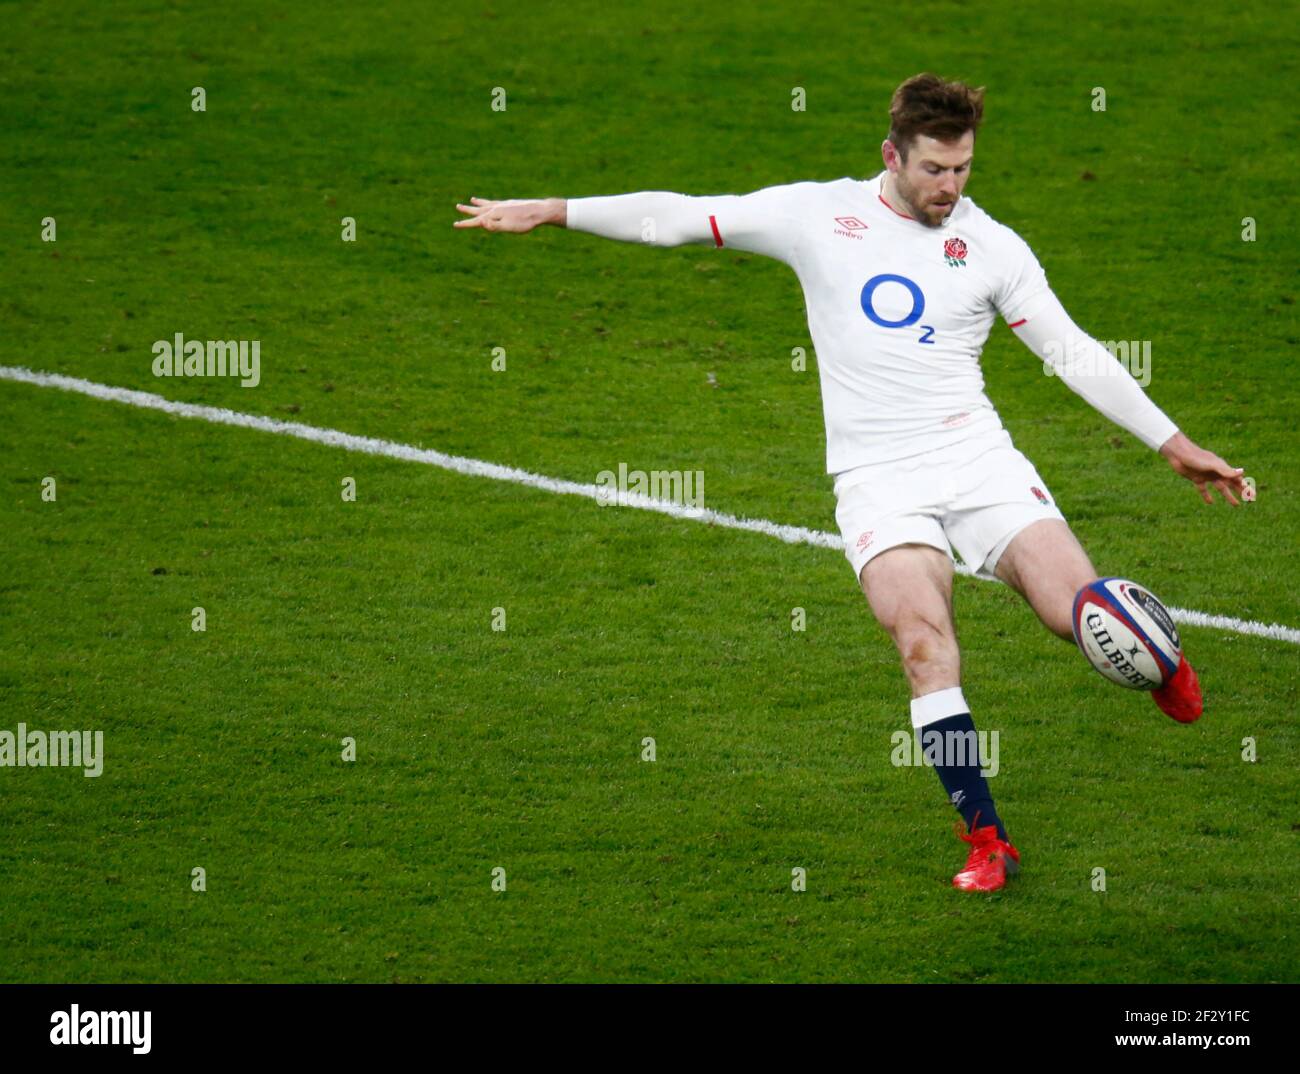 London, UK. 13th Mar, 2021. TWICKENHAM, ENGLAND - MARCH 13: Elliott Daly of England during Guinness 6 Nations between England and France at Twickenham Stadium, London, UK on 13th March 2021 Credit: Action Foto Sport/Alamy Live News Stock Photo